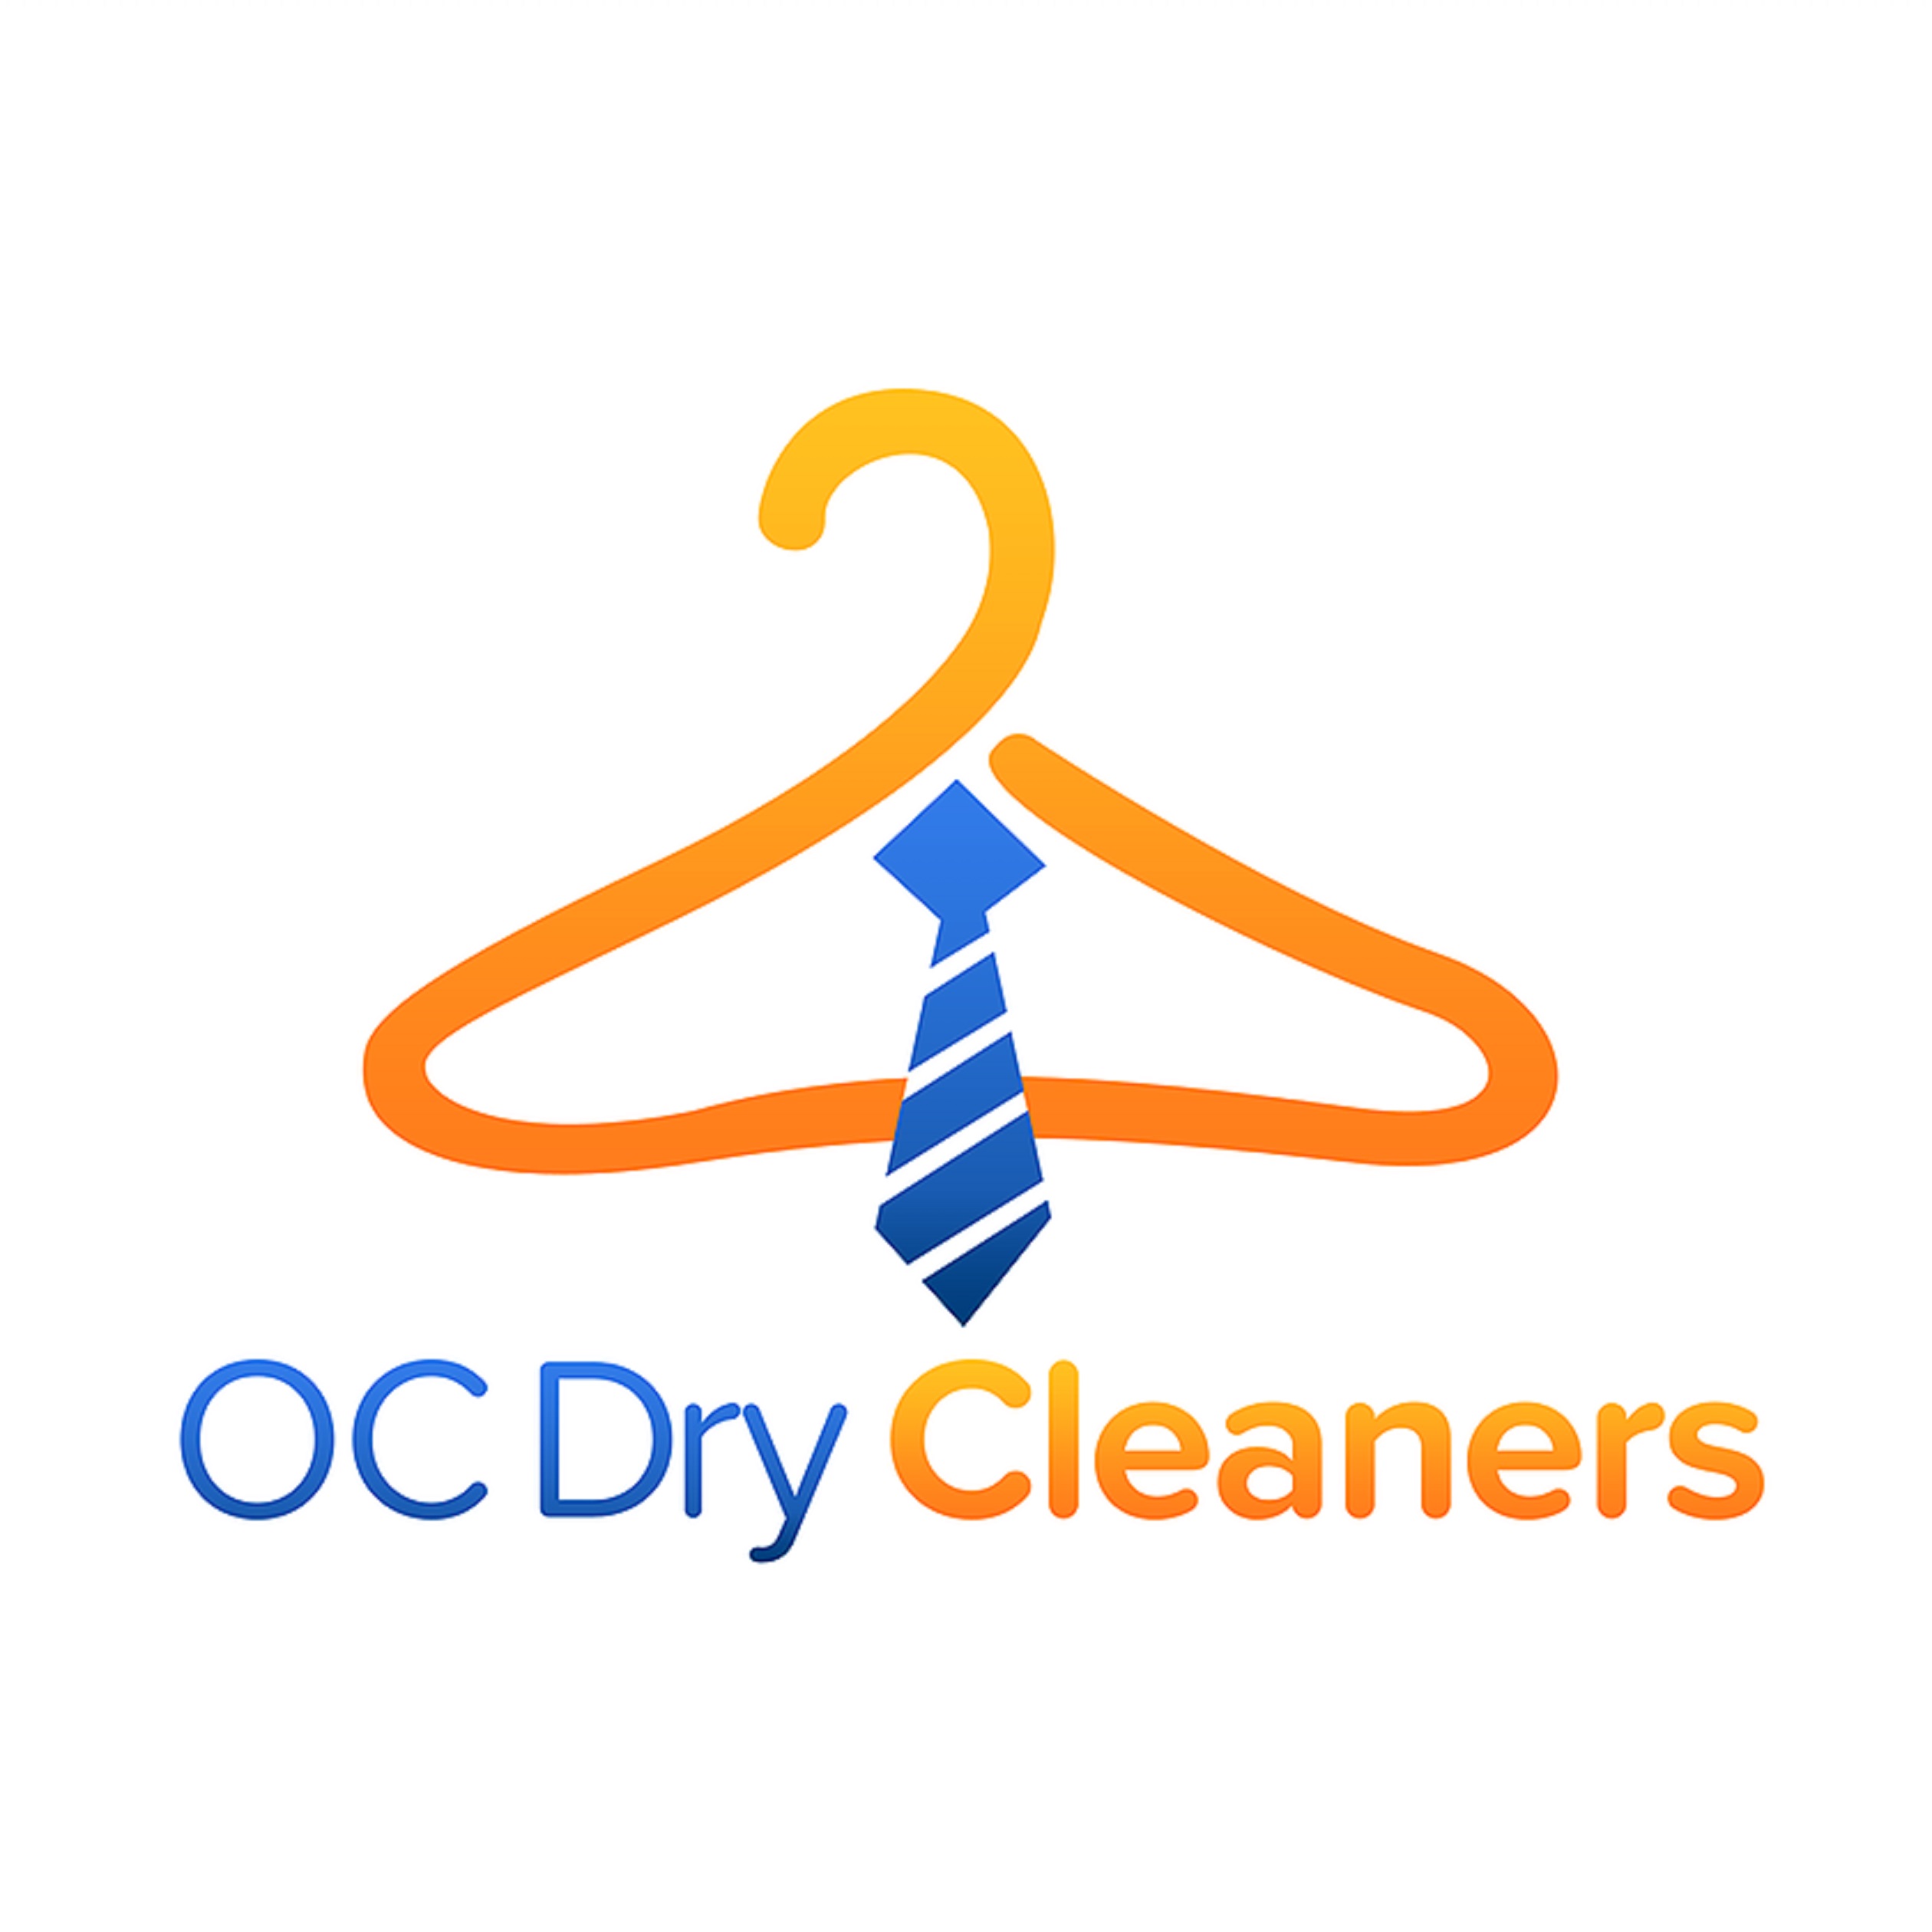 OC Dry Cleaners